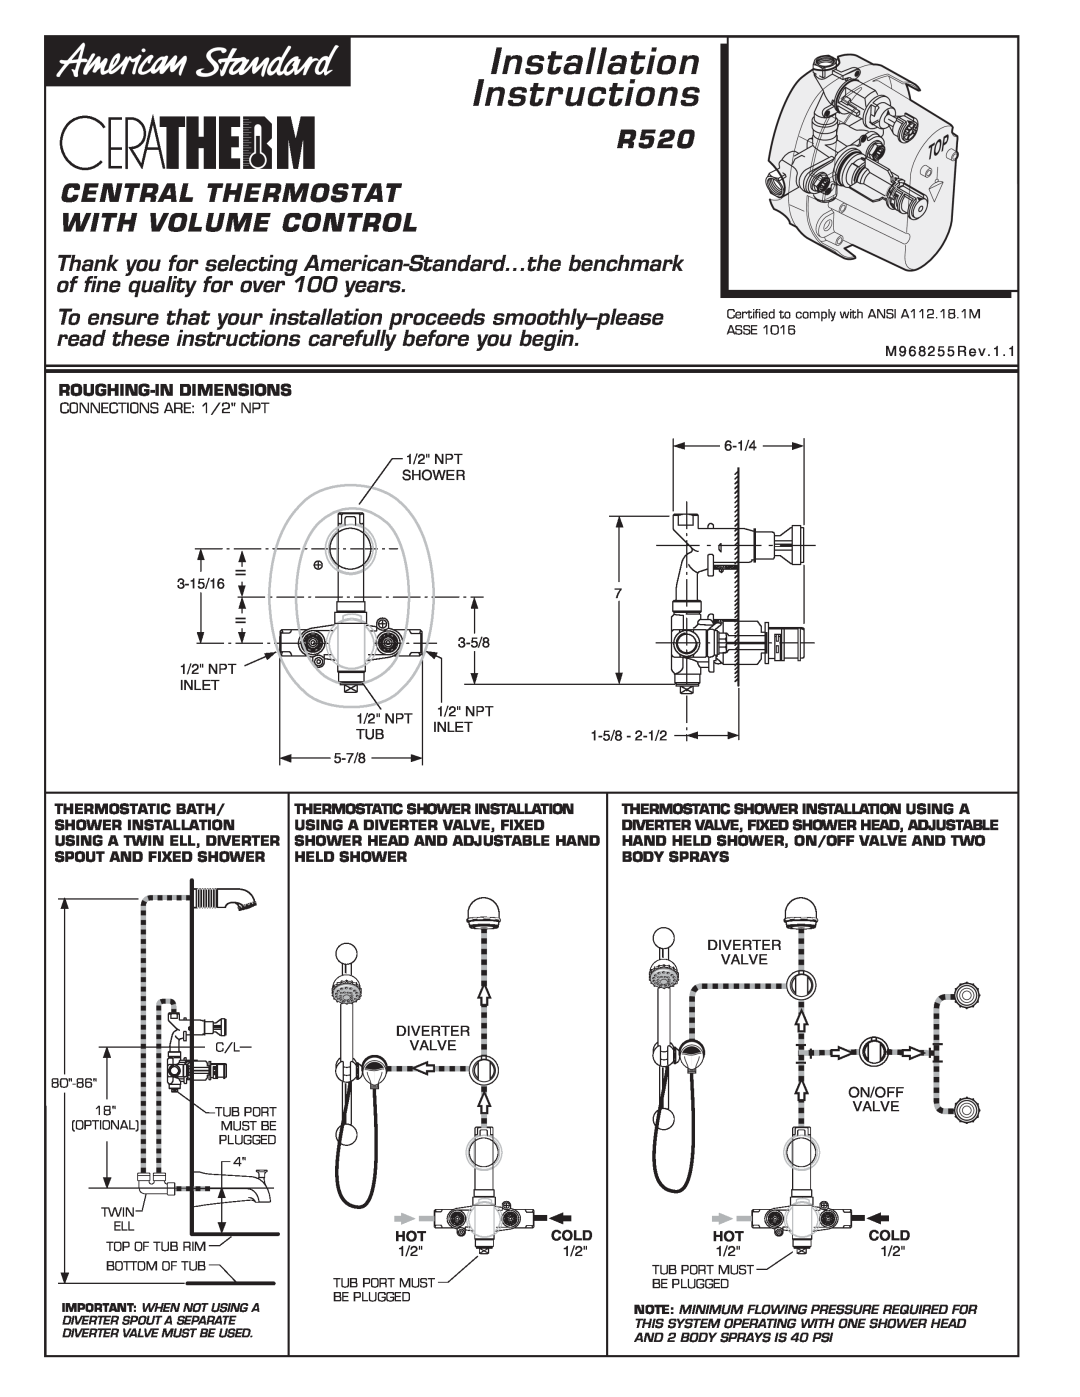 American Standard T050.210 installation instructions R520 CENTRAL THERMOSTAT WITH VOLUME CONTROL, Installation Instructions 